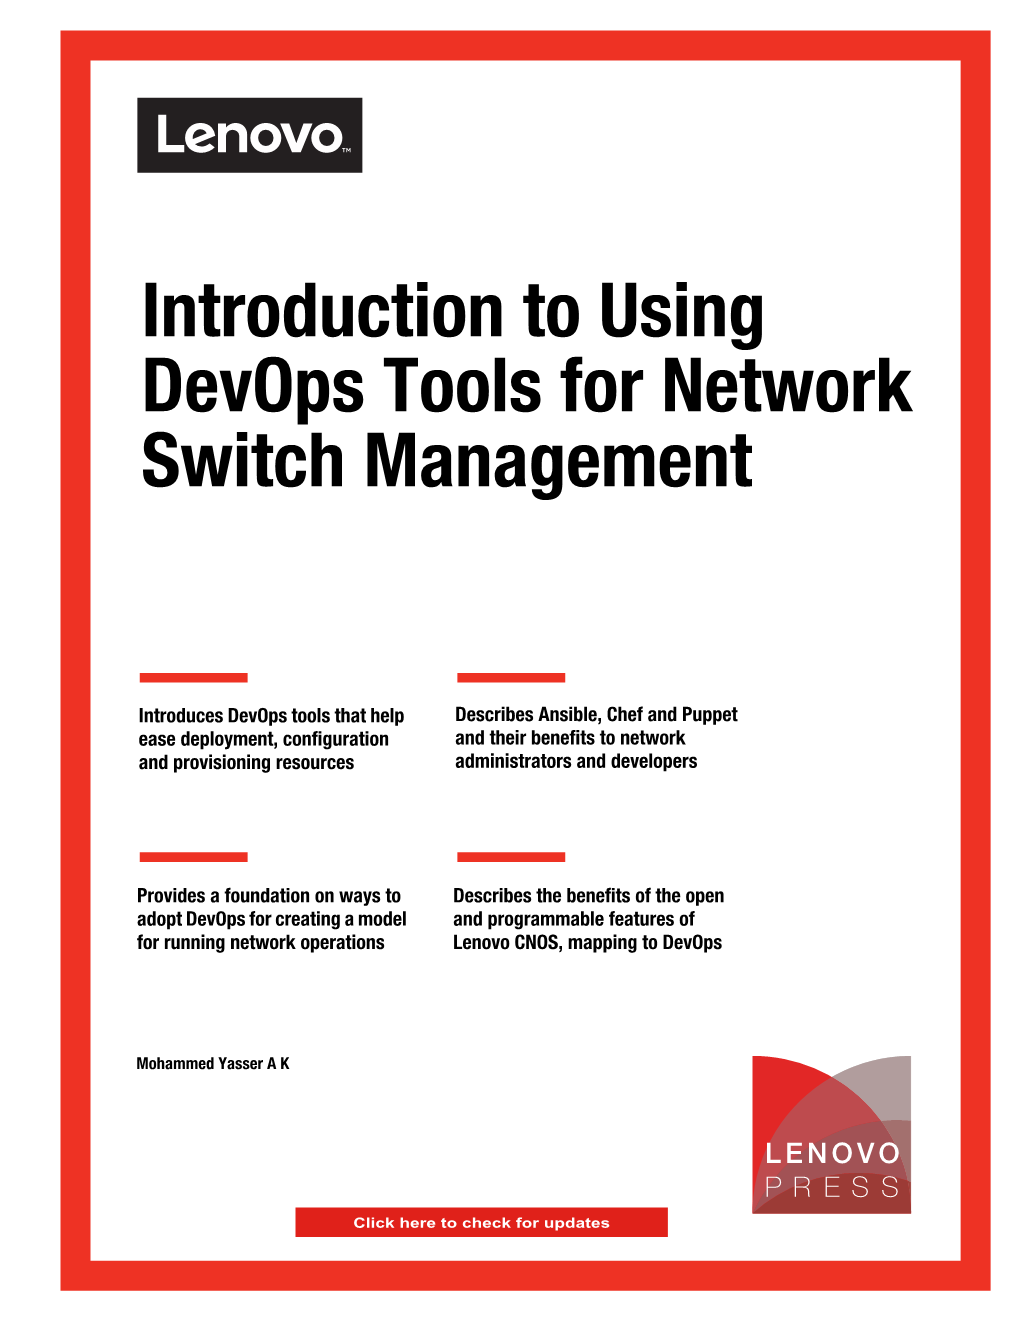 Introduction to Using Devops Tools for Network Switch Management